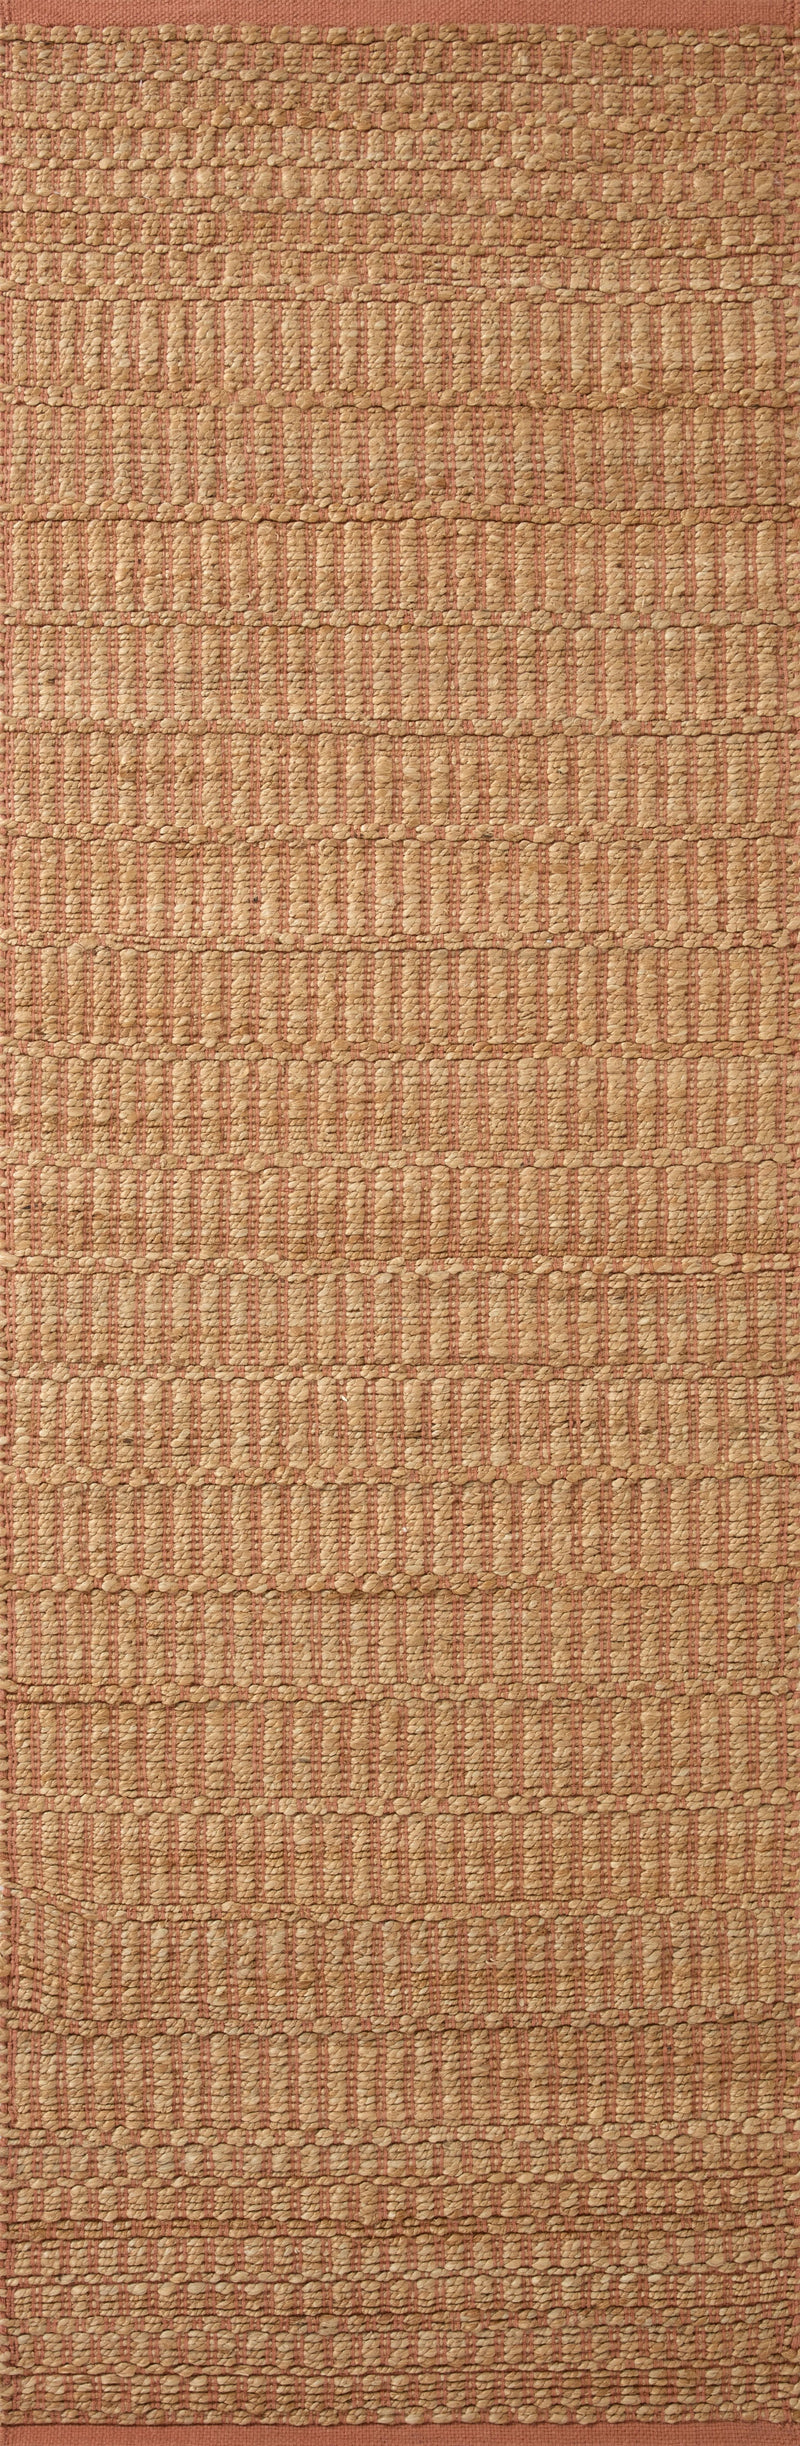 media image for colton hand woven natural clay rug by angela rose x loloi colocon 05nacg2030 2 266